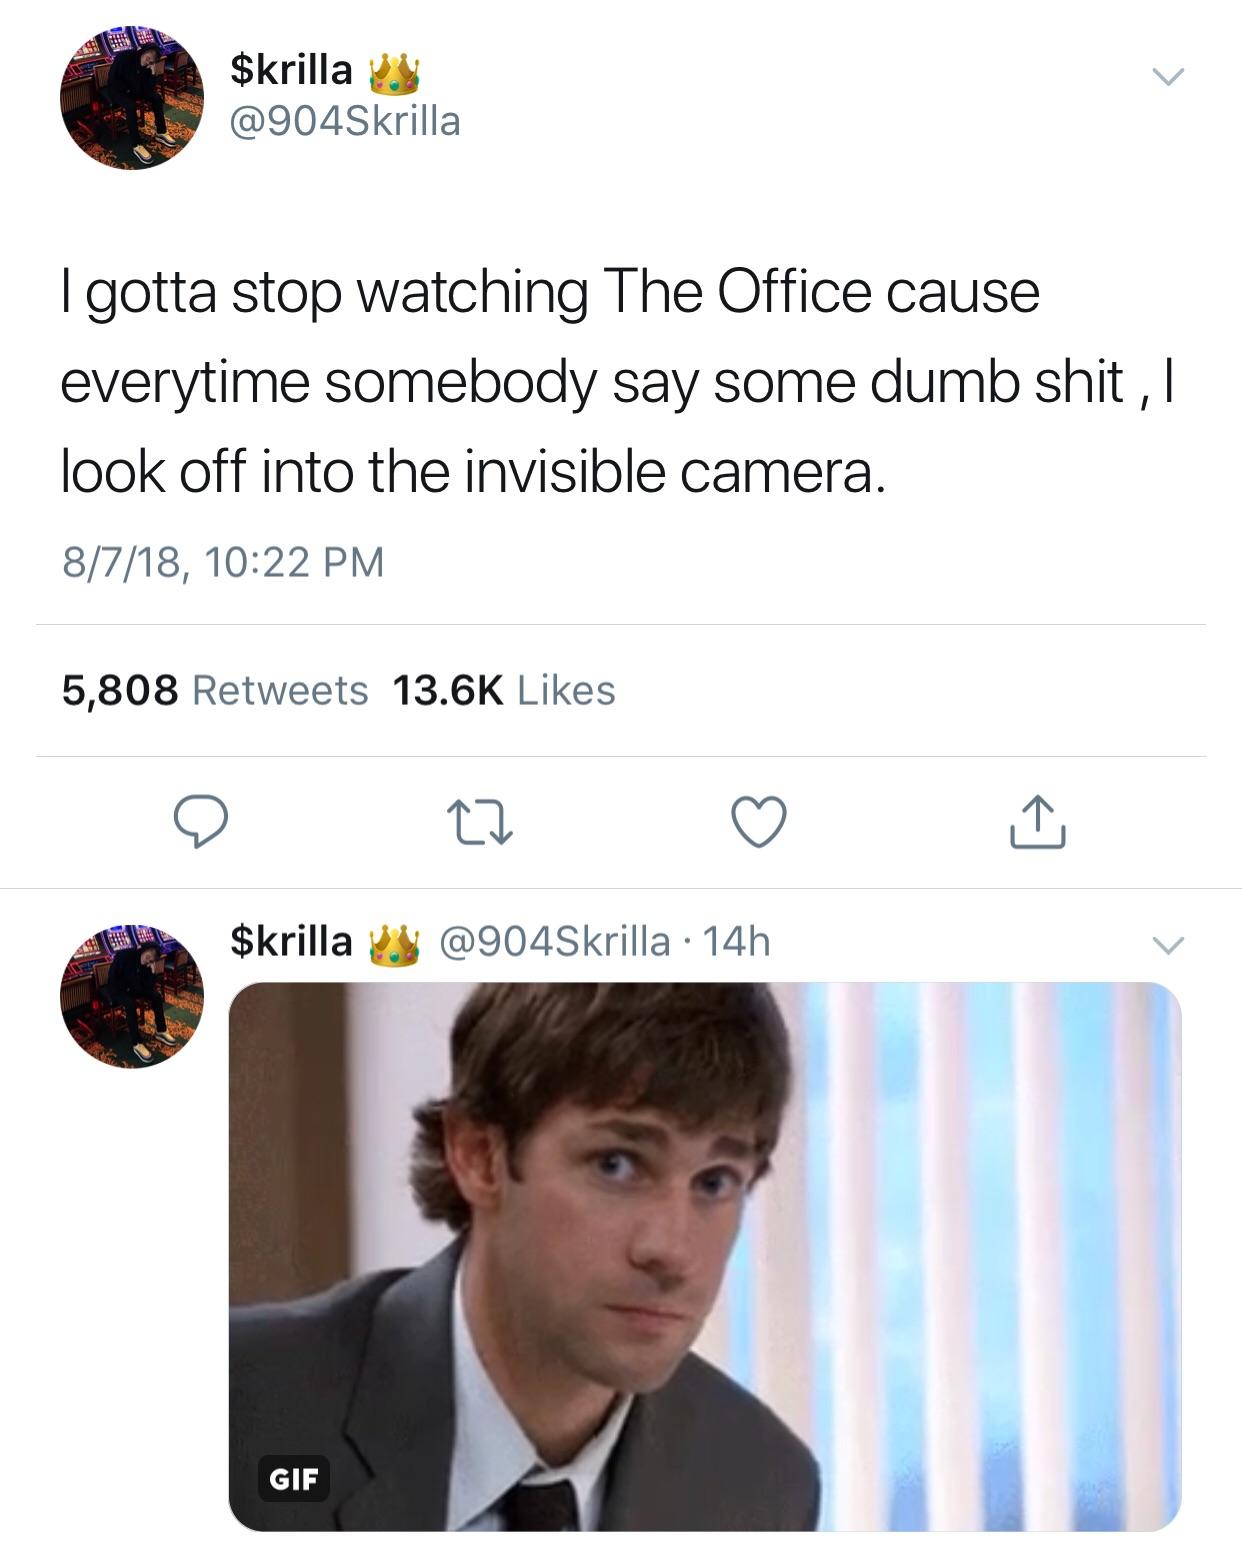 office invisible camera meme - $krilla y I gotta stop watching The Office cause everytime somebody say some dumb shit, I look off into the invisible camera. 8718, 5,808 $krilla y 14h Gif